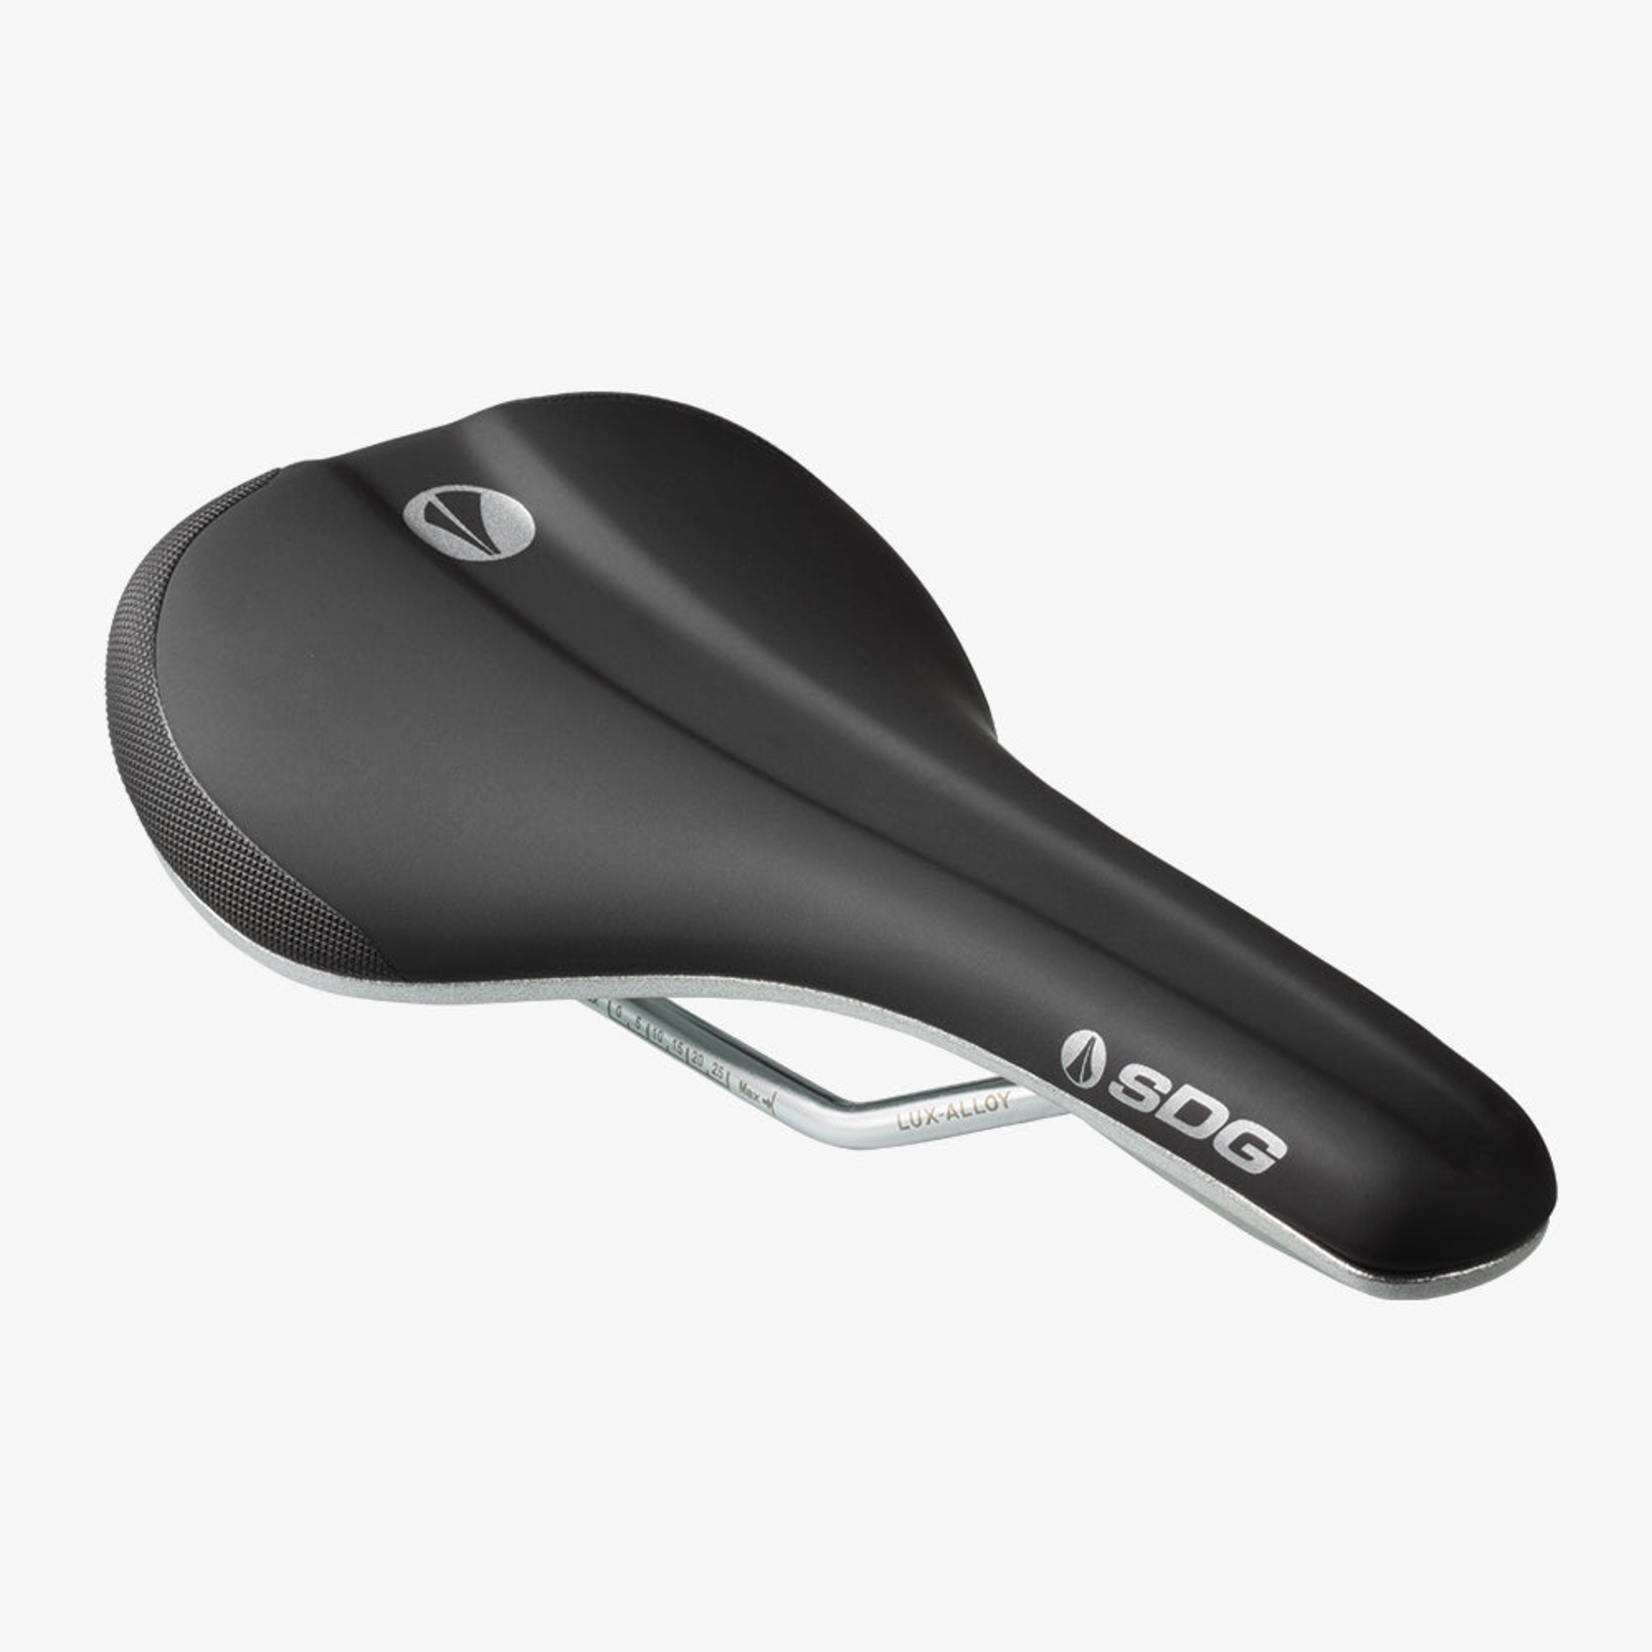 SDG SDG Bel-Air V3 Saddle - PVD Coated Lux-Alloy, Black/Silver, Sonic Welded Sides, Limited Edition Galactic